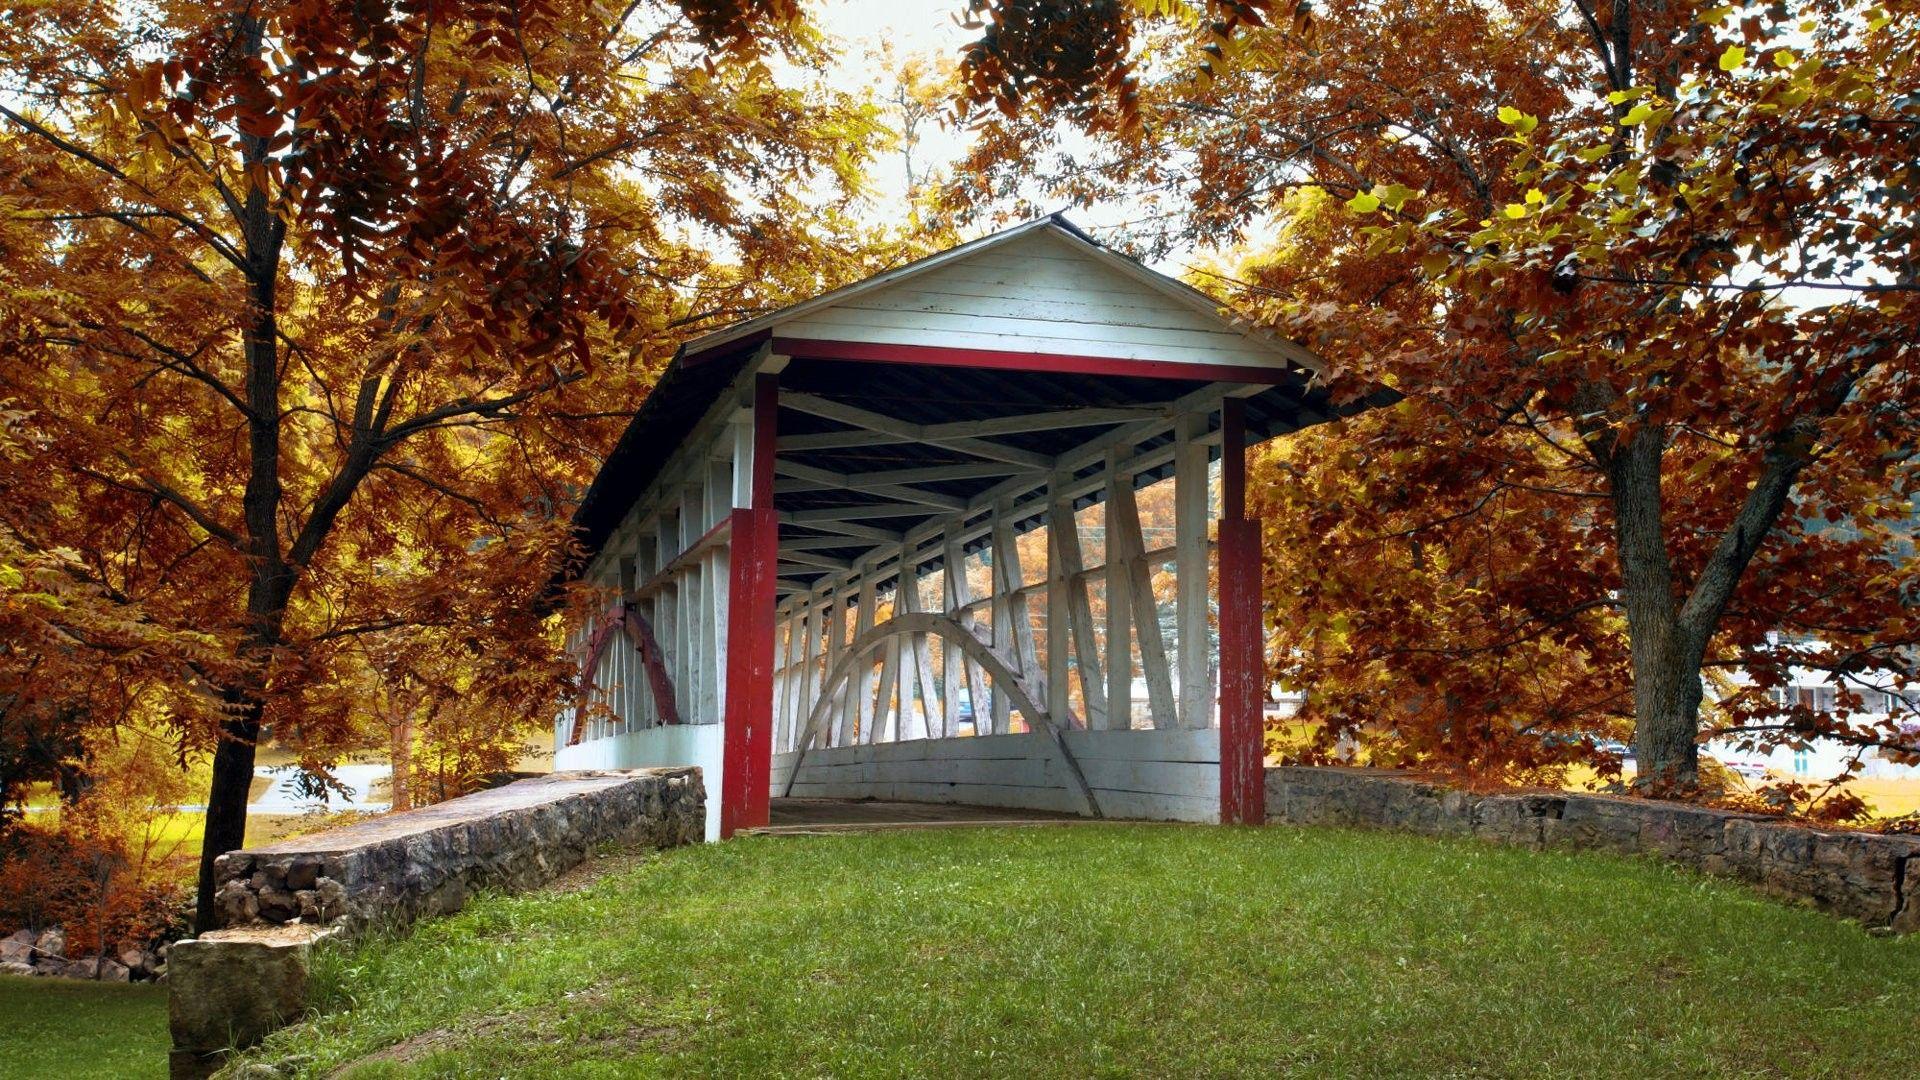 Bridges: Knisely Covered Bridge Bedford County Pennsylvania Trees